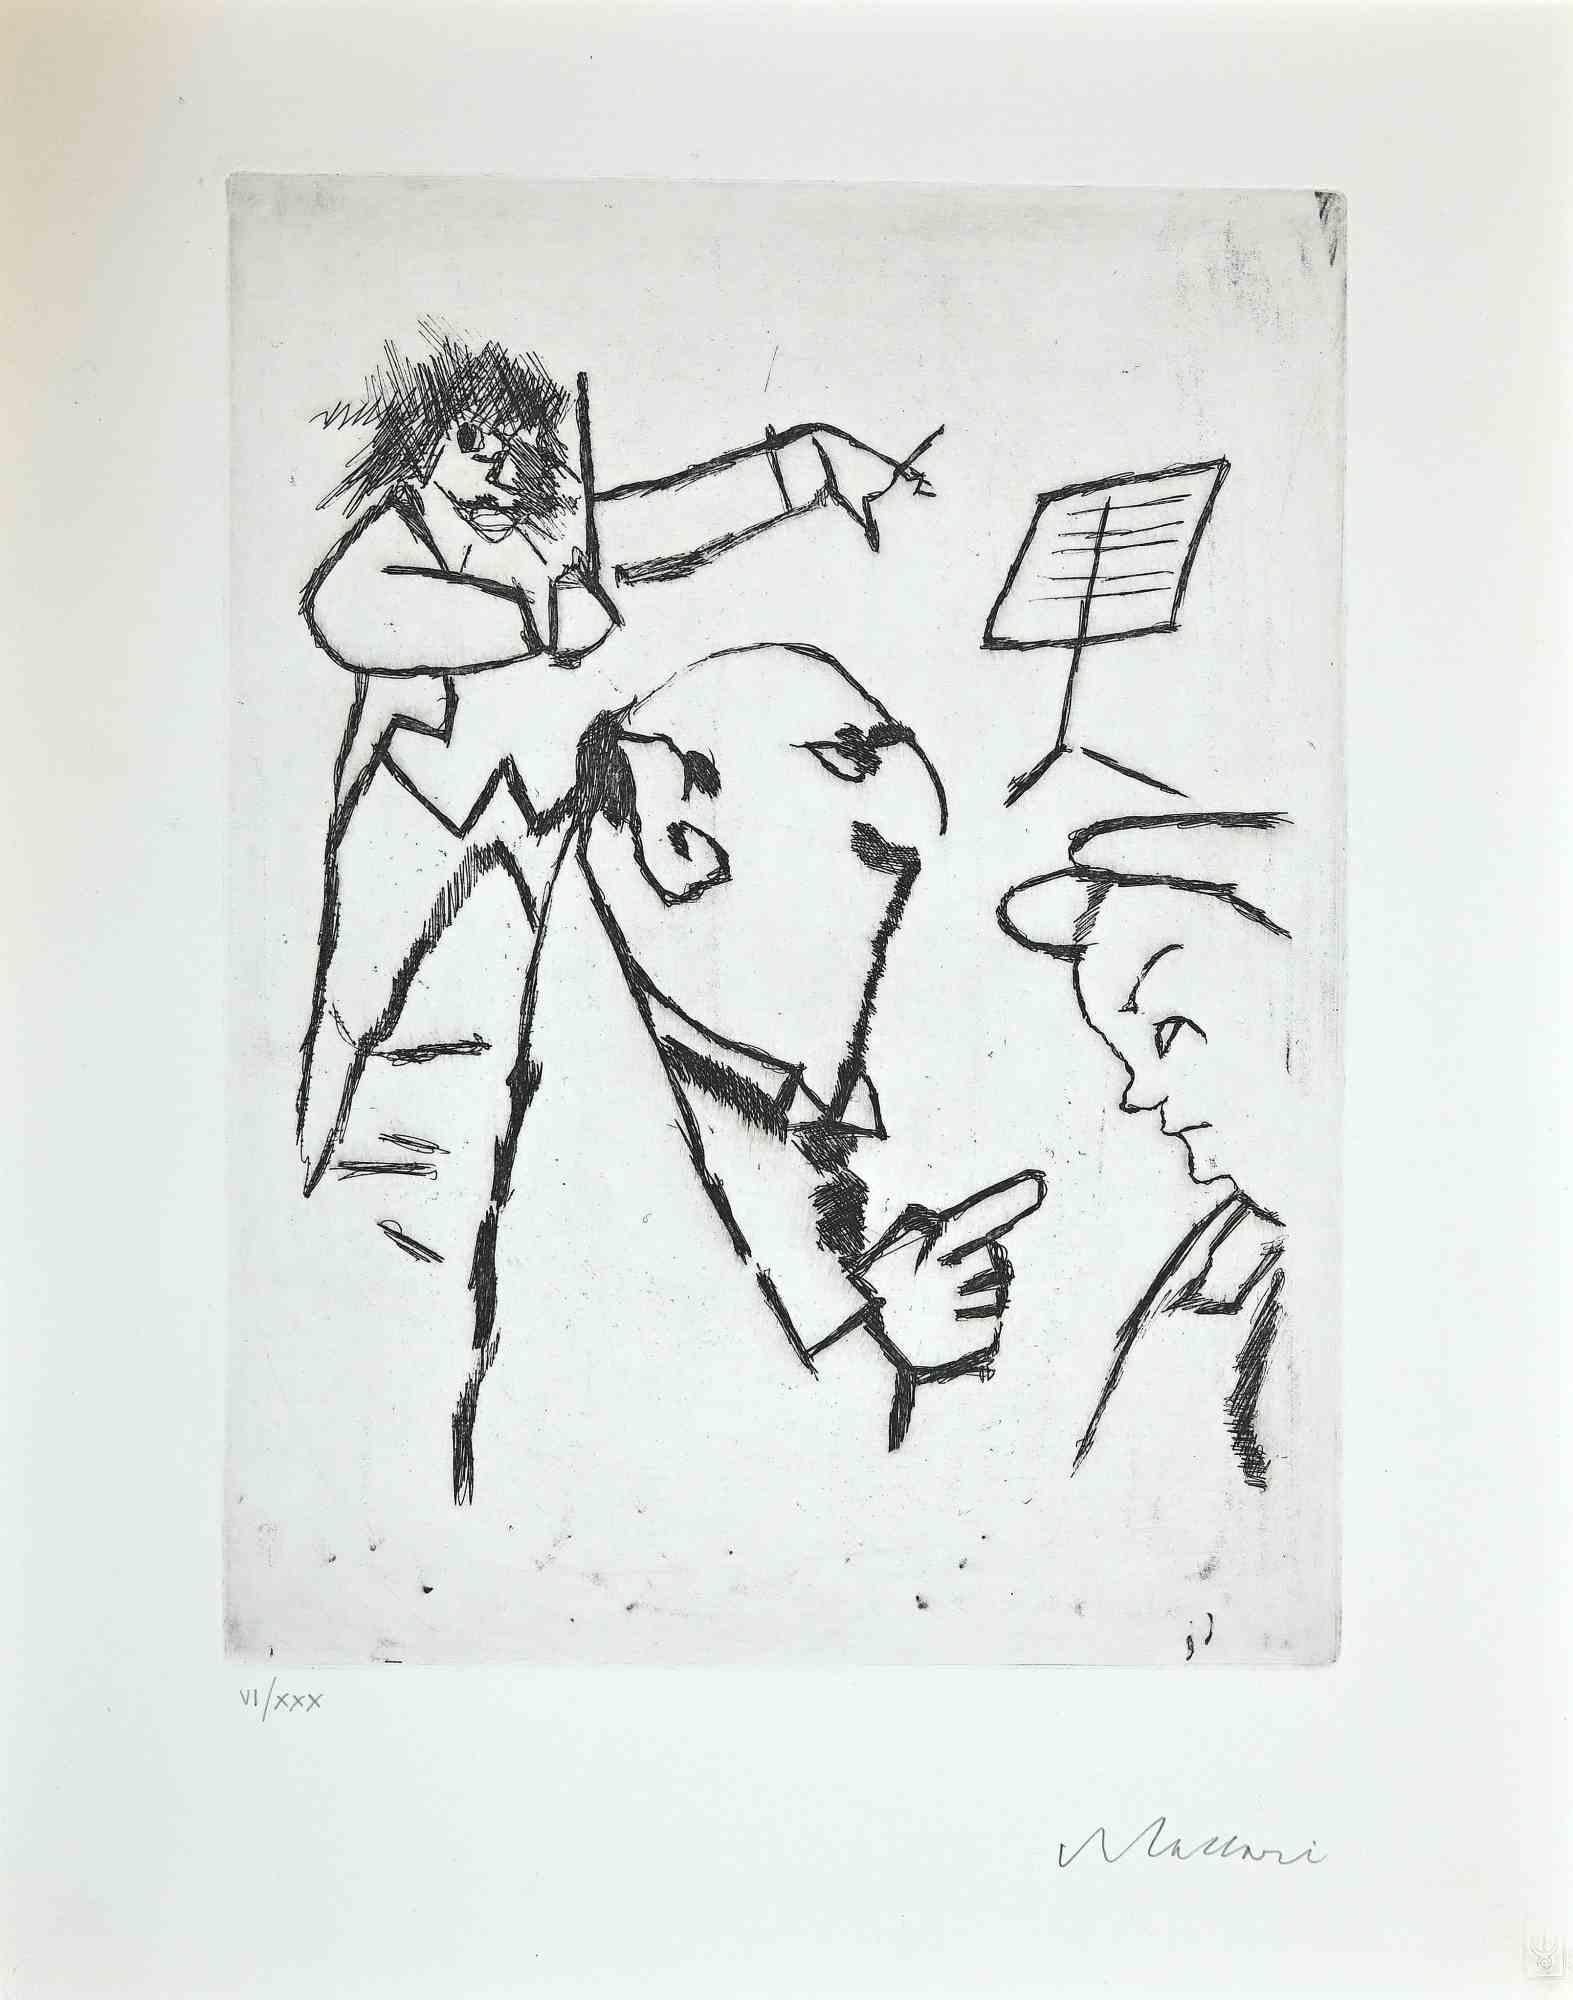 At the concert is an original modern artwork realized in 1970s by the Italian artist  Mino Maccari  (Siena, 1898 - Rome, 1989).

Original black and white etching and drypoint.

Hand-signed by the artist on the lower corner:  Mino Maccari.

Numbered.